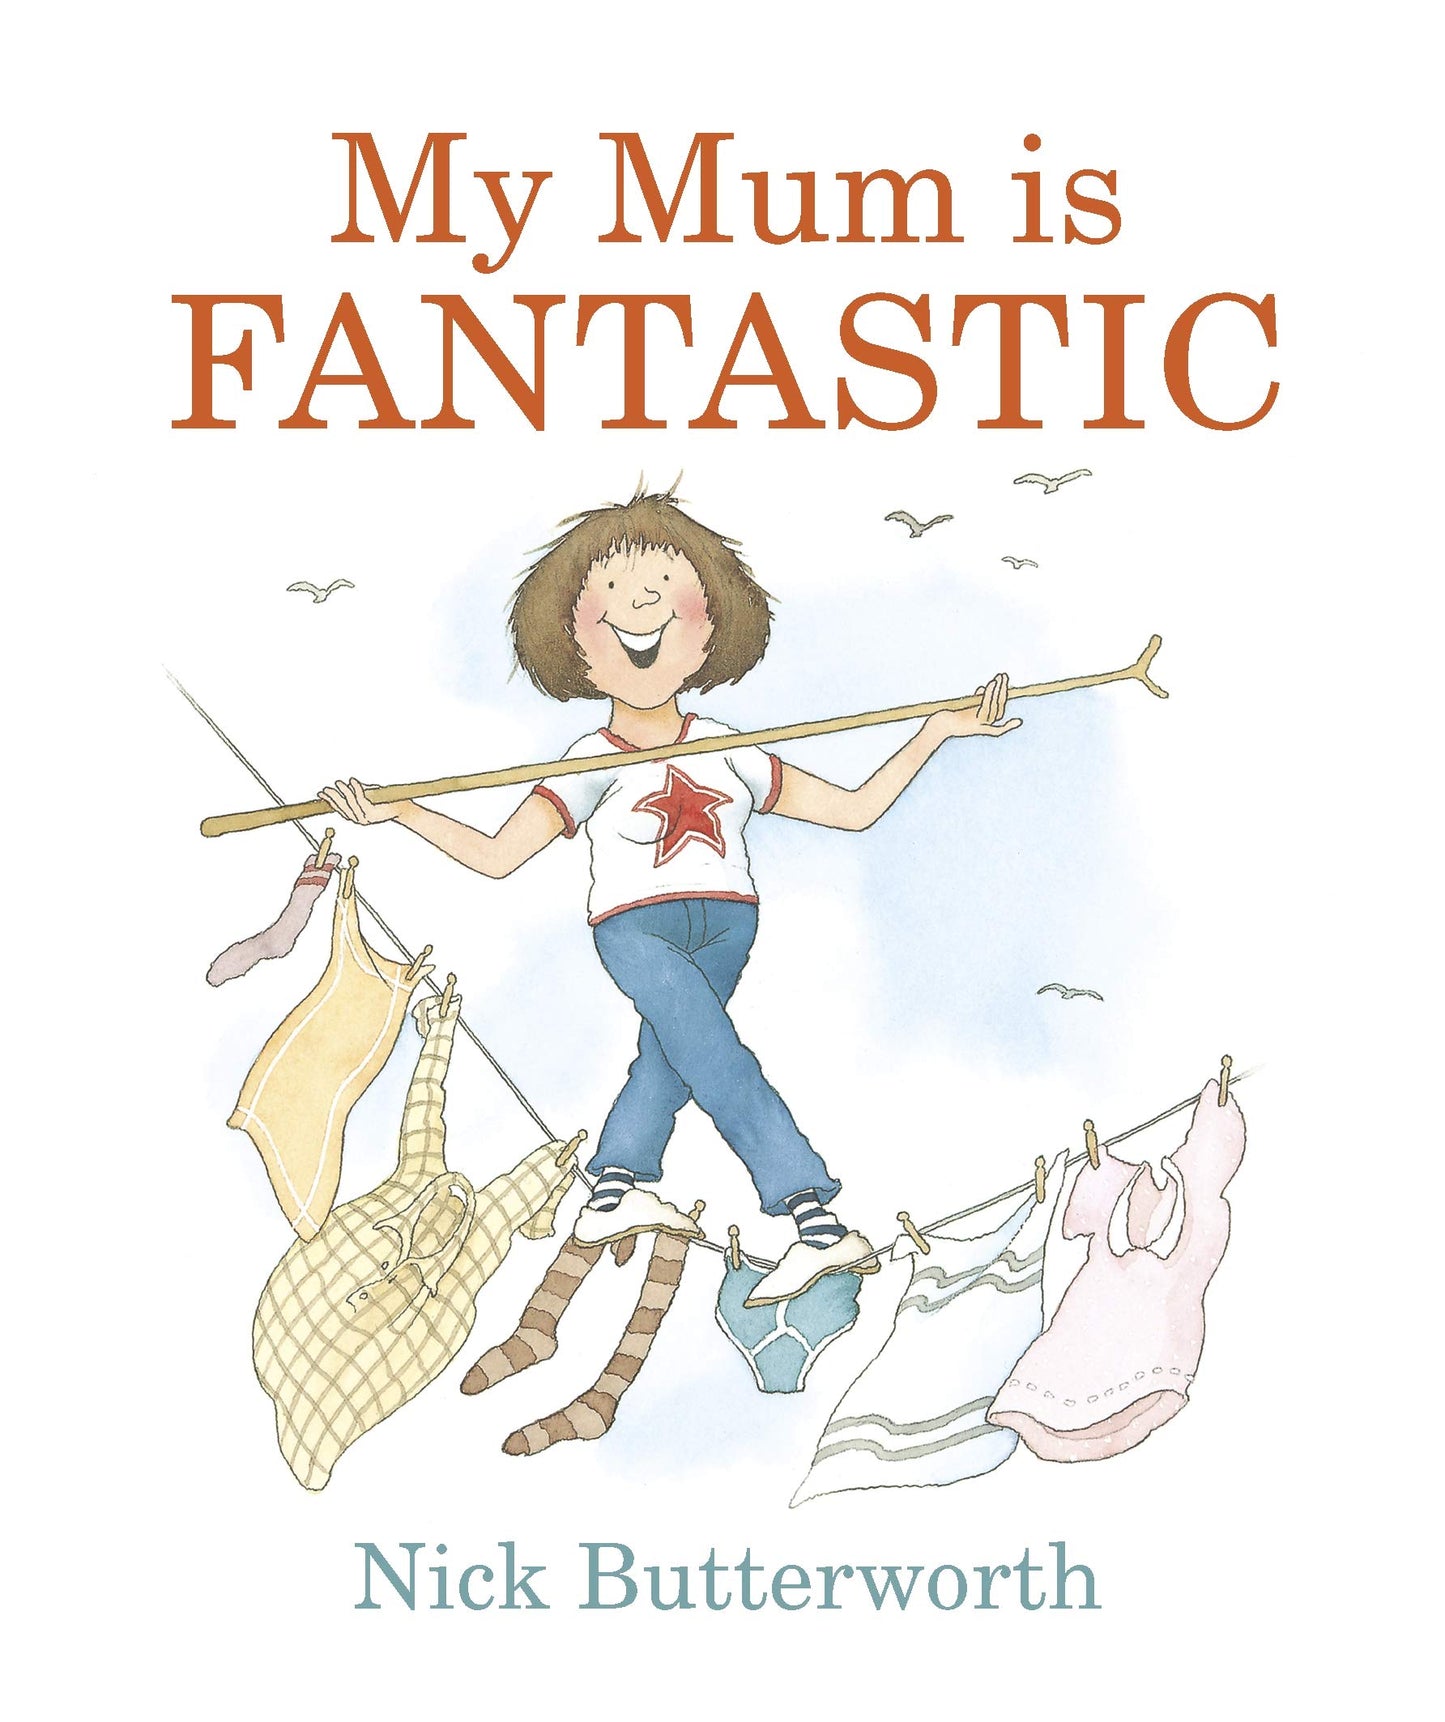 My Mum is Fantastic by Nick Butterworth (Board Book)